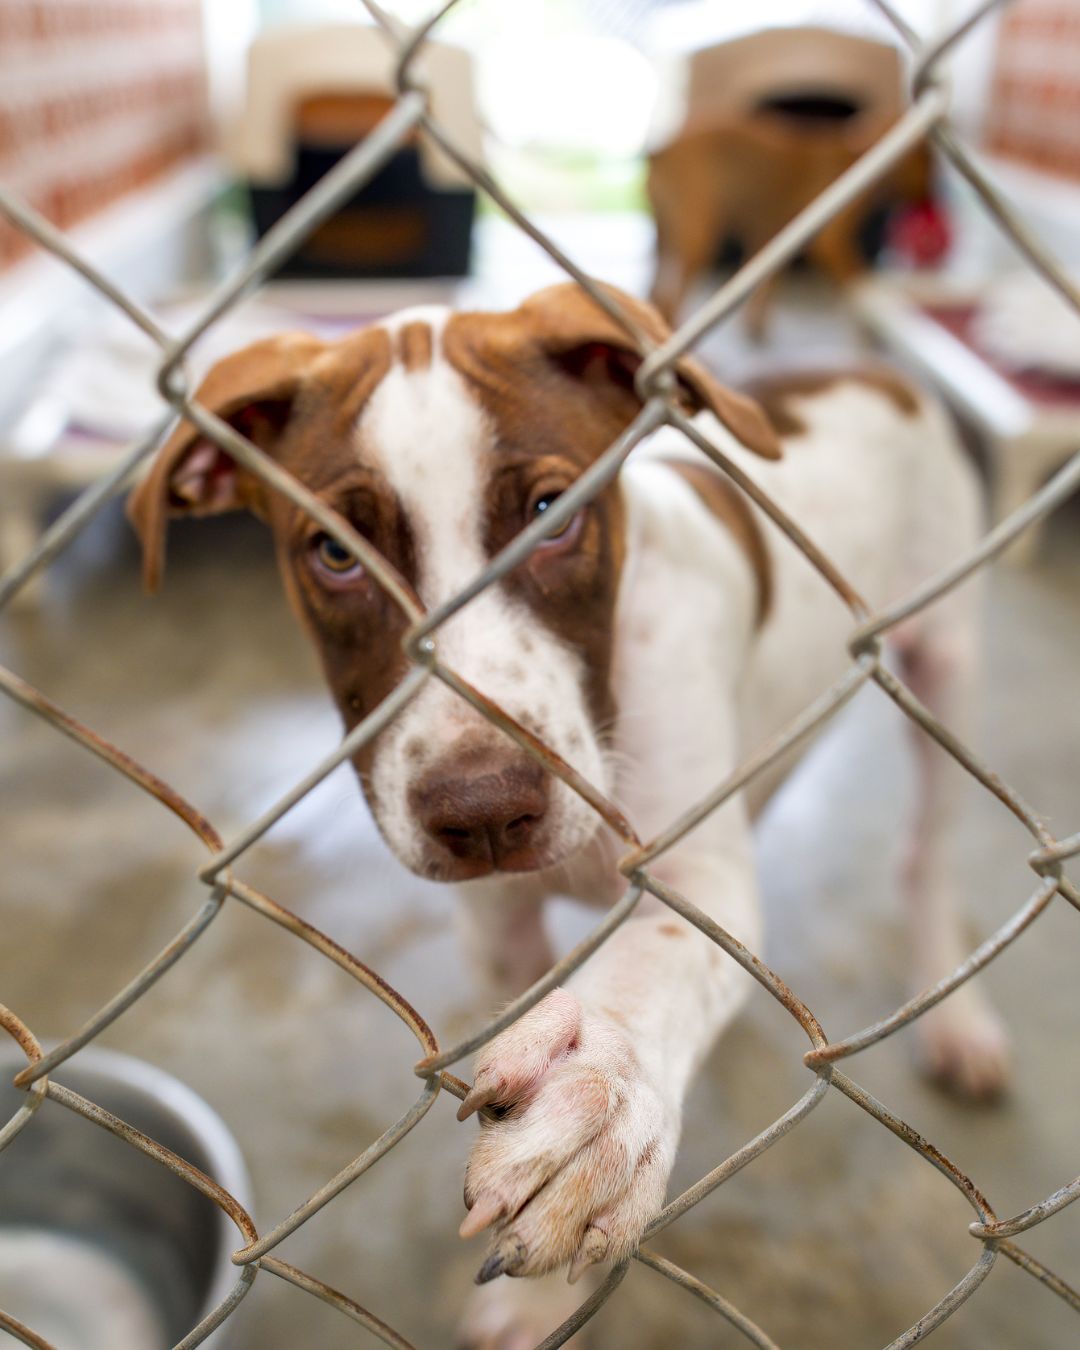 Common misconceptions about shelter animals